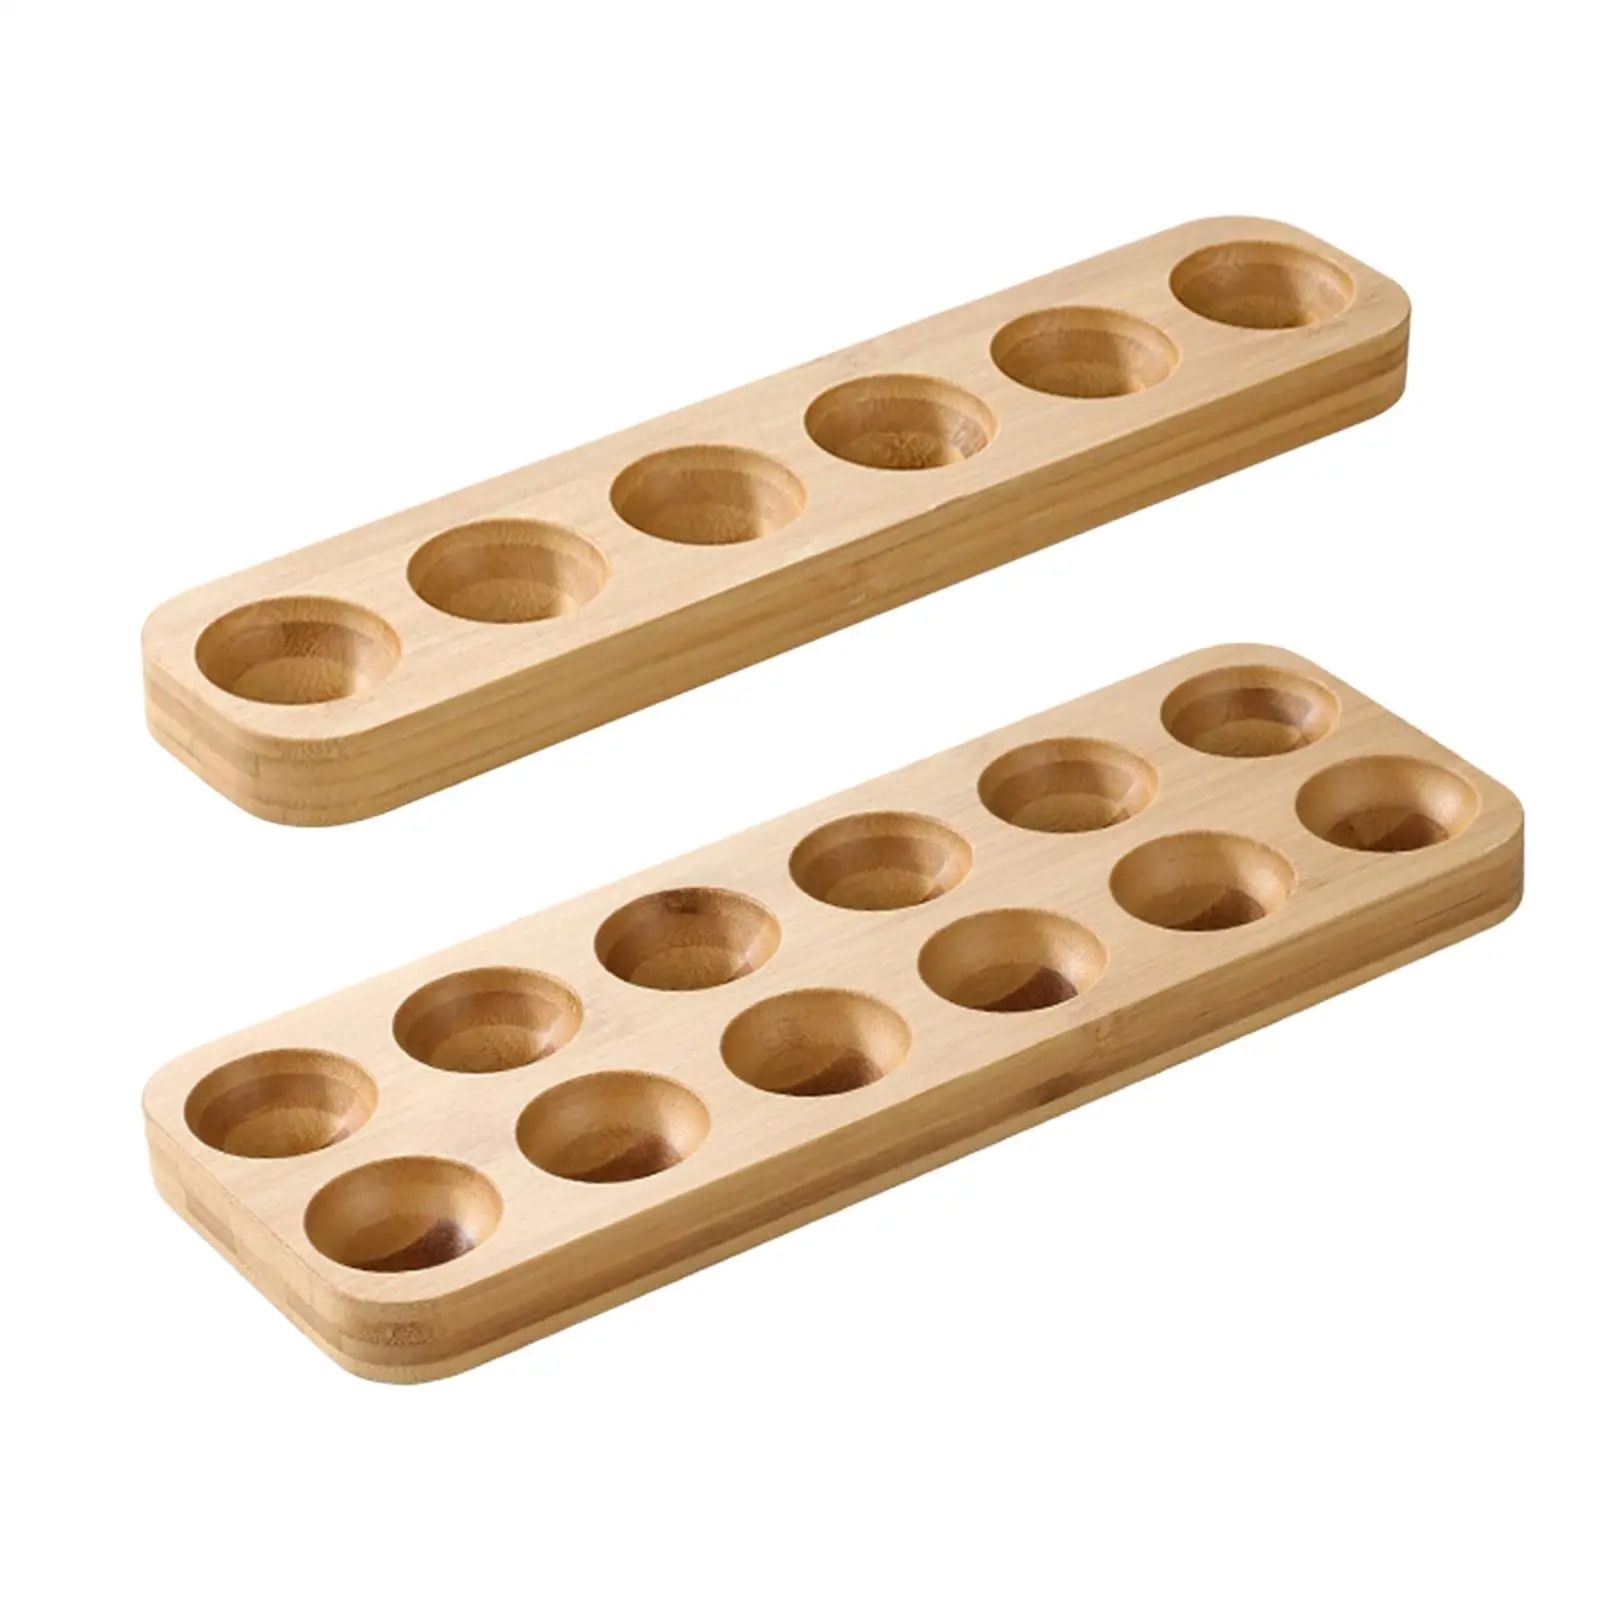 Wooden Egg Holder Rustic Unique Gift Storage Countertop Wood Egg Tray for Household Supermarket Tabletop Restaurants Cabinet